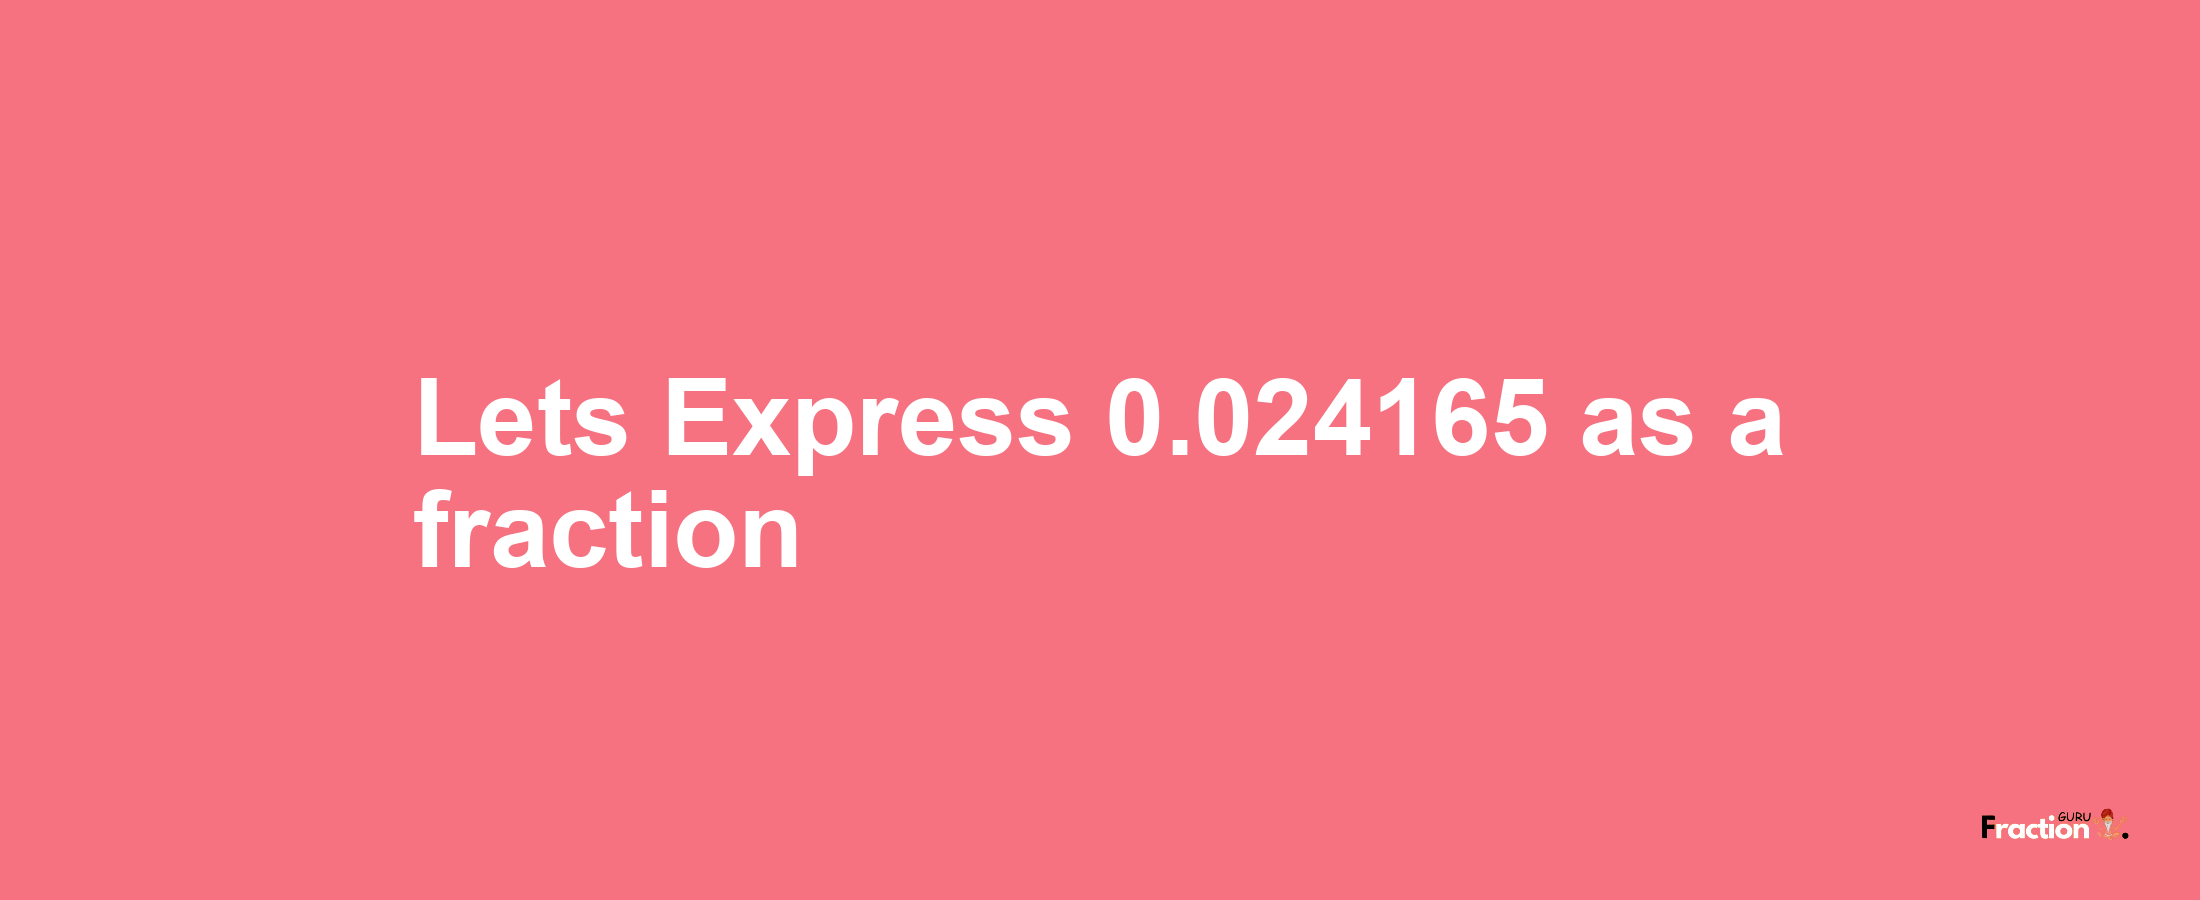 Lets Express 0.024165 as afraction